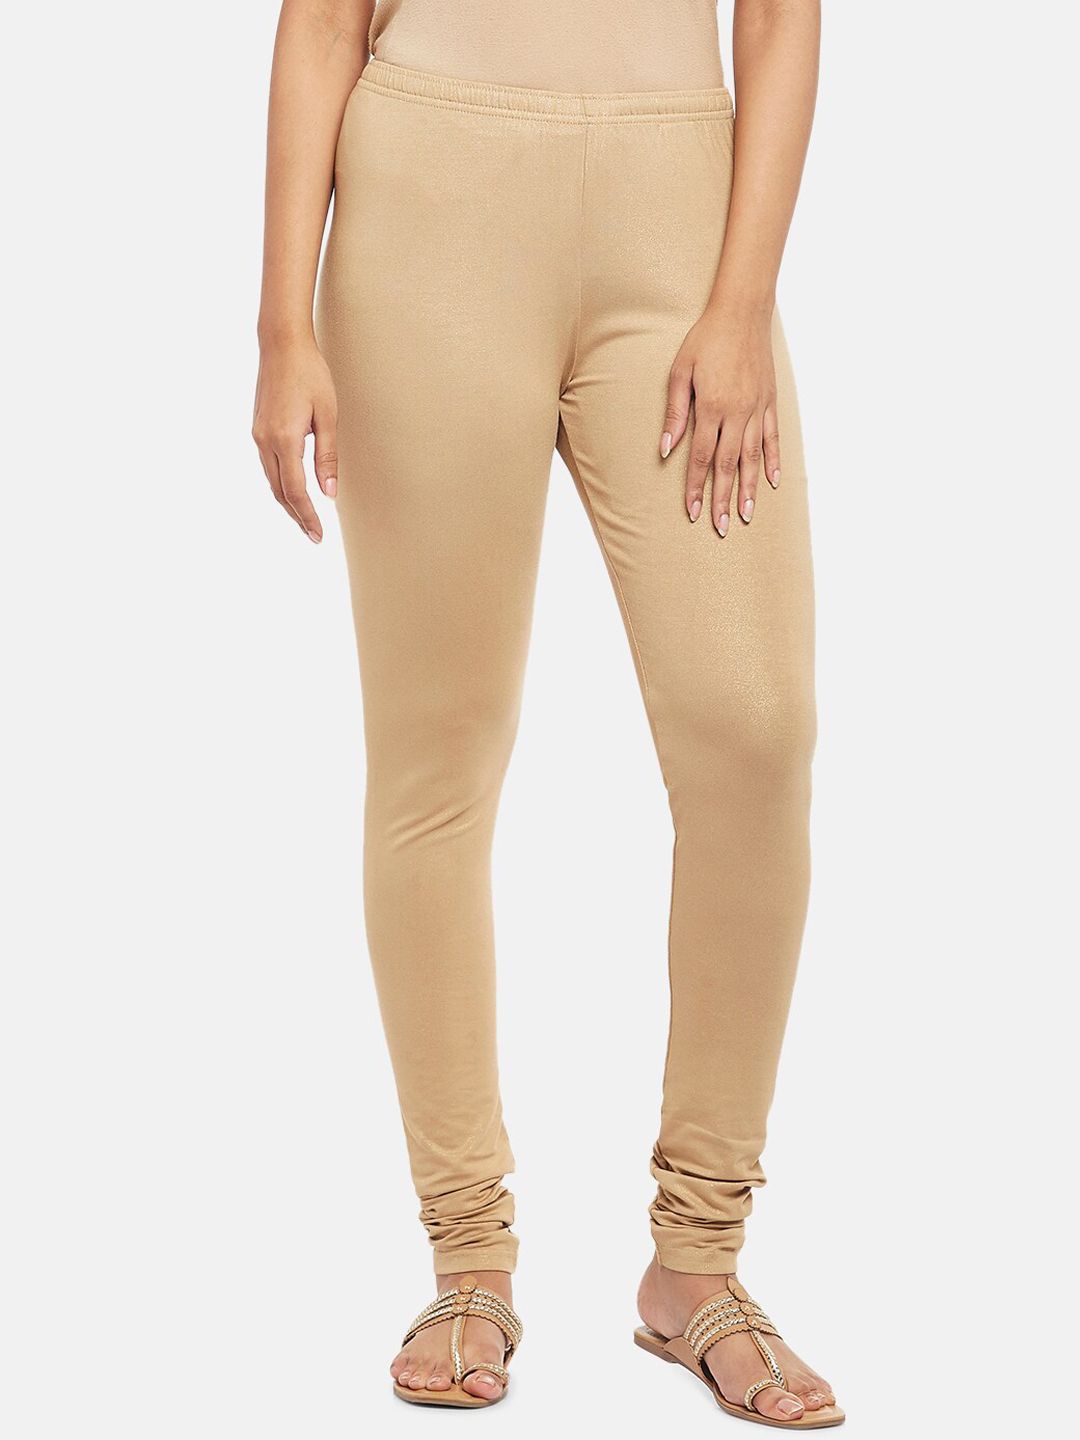 RANGMANCH BY PANTALOONS Gold-Toned Solid Leggings Price in India